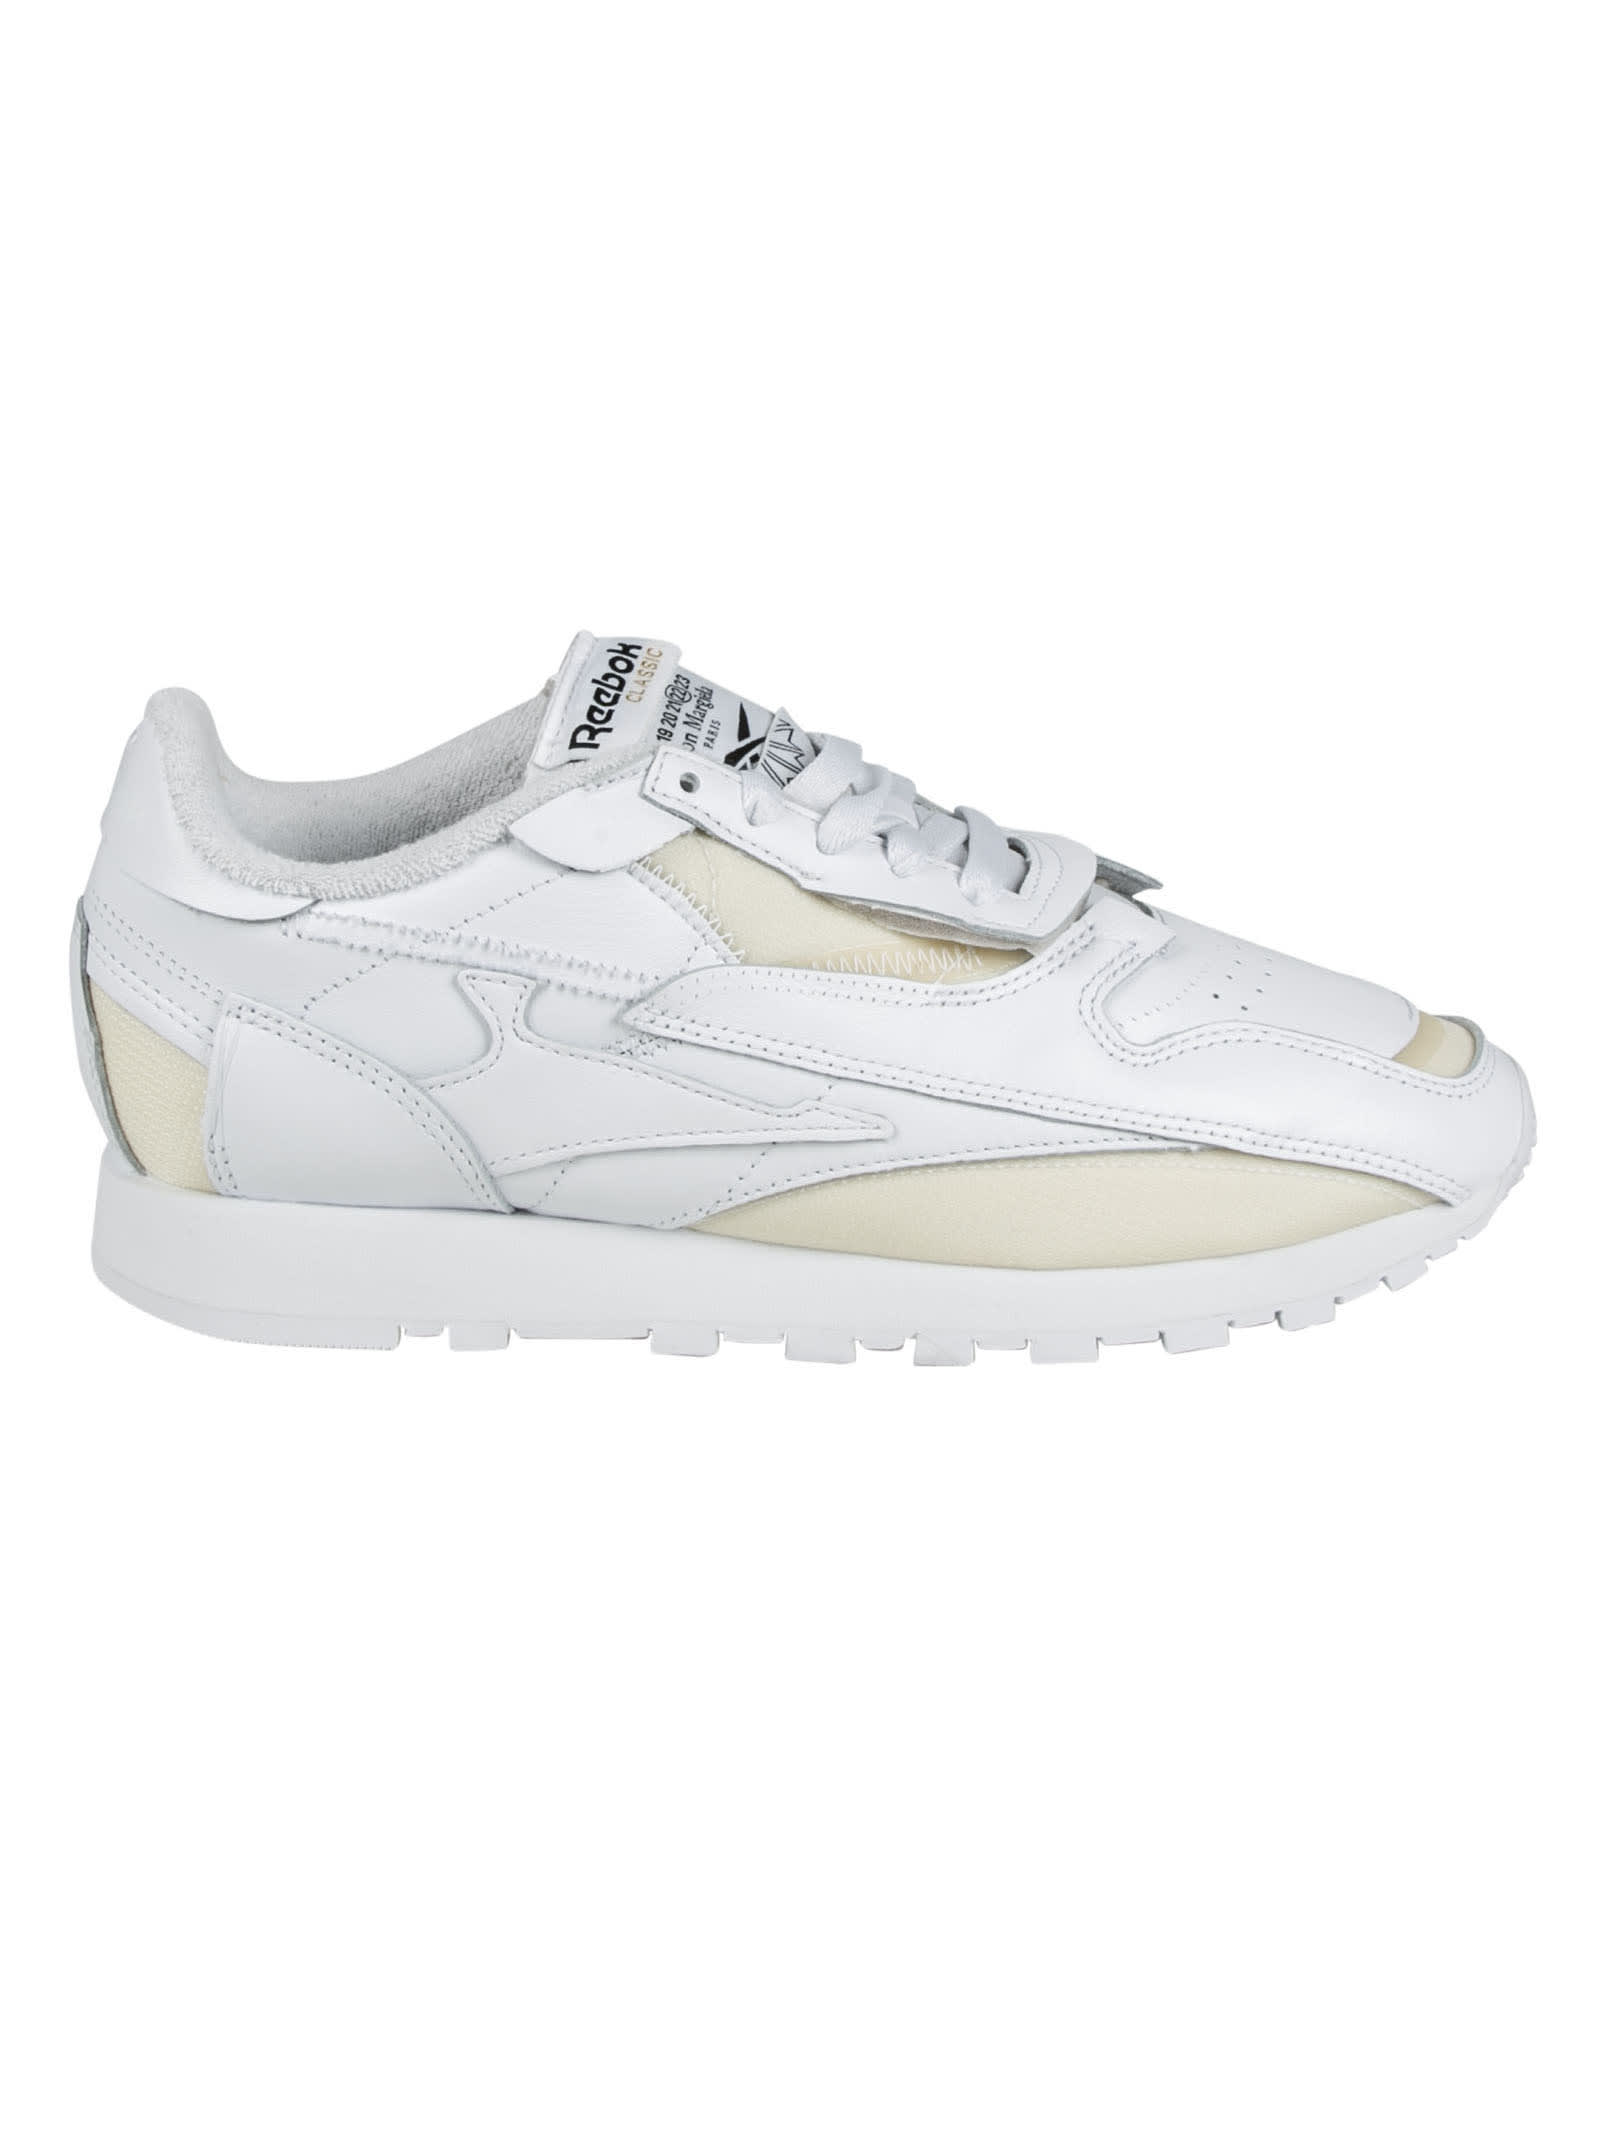 Maison Margiela Project 0 Casual Sneakers